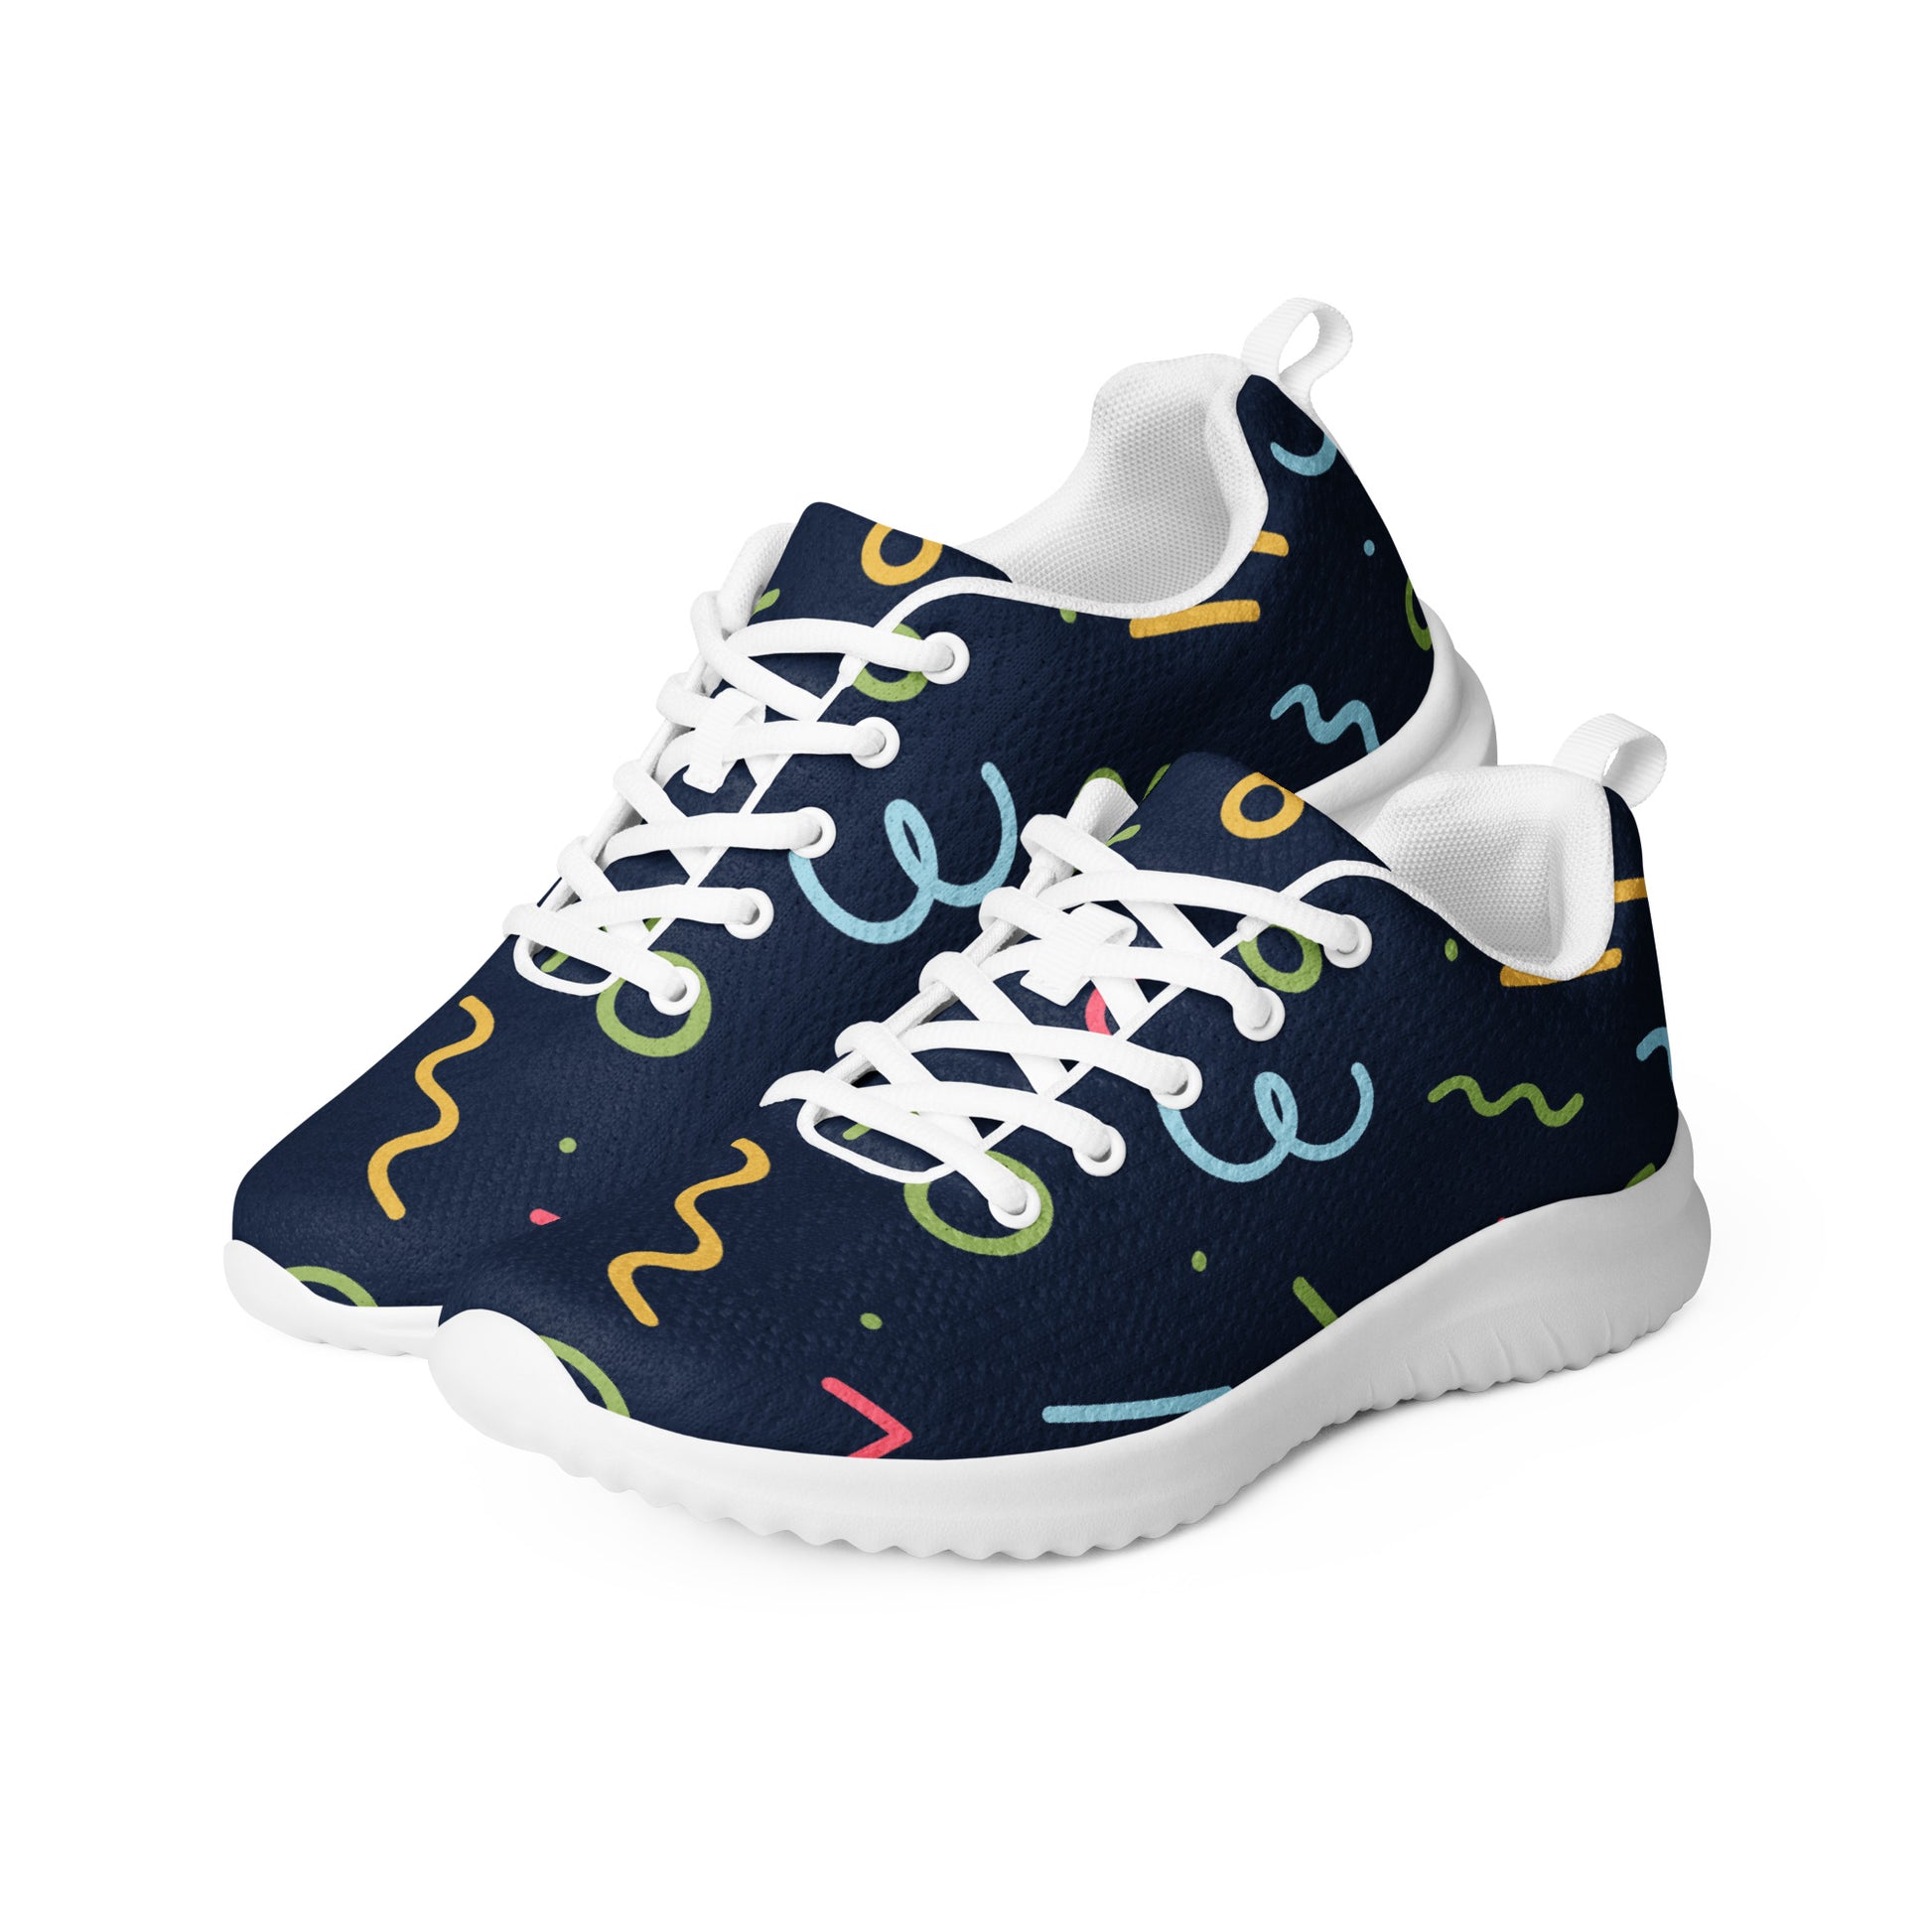 Squiggles - Men’s athletic shoes Mens Athletic Shoes